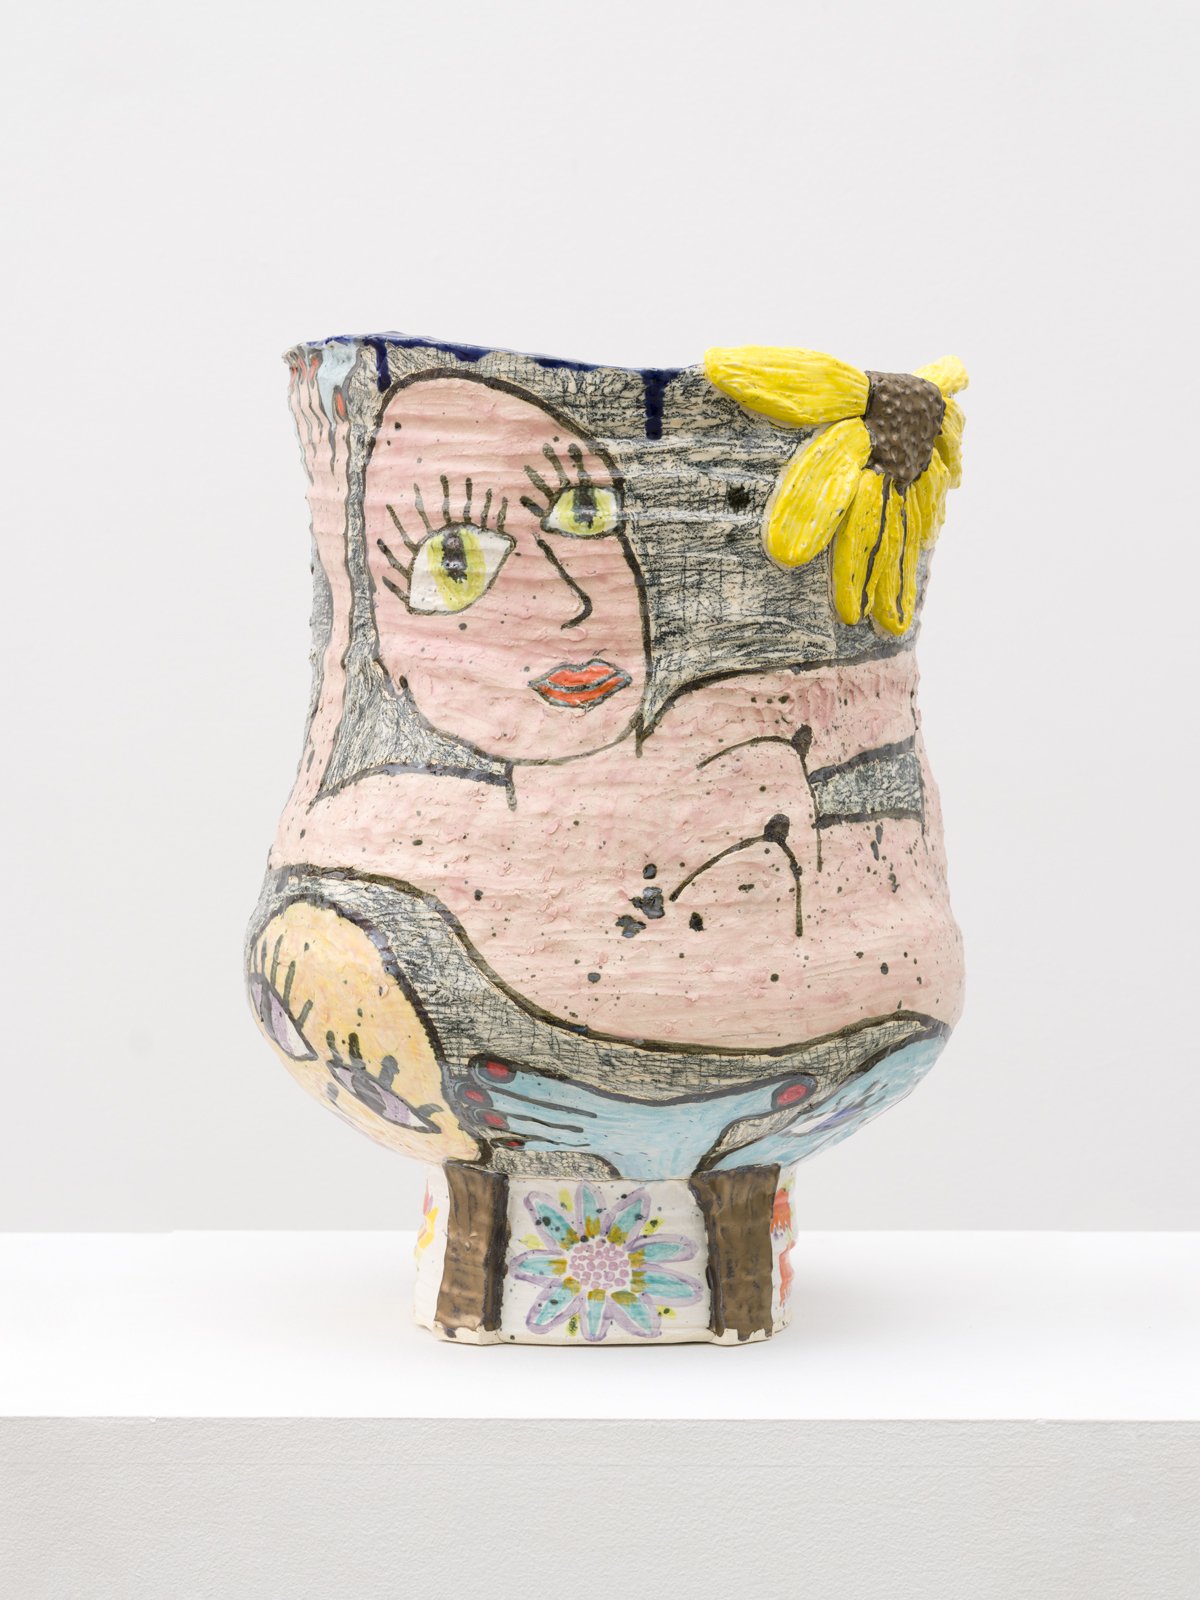  Jennifer King  Wondering at the great surprise of the survival of the self, 2023  Glazed Ceramic  17½ x 13 x 12½ in. 